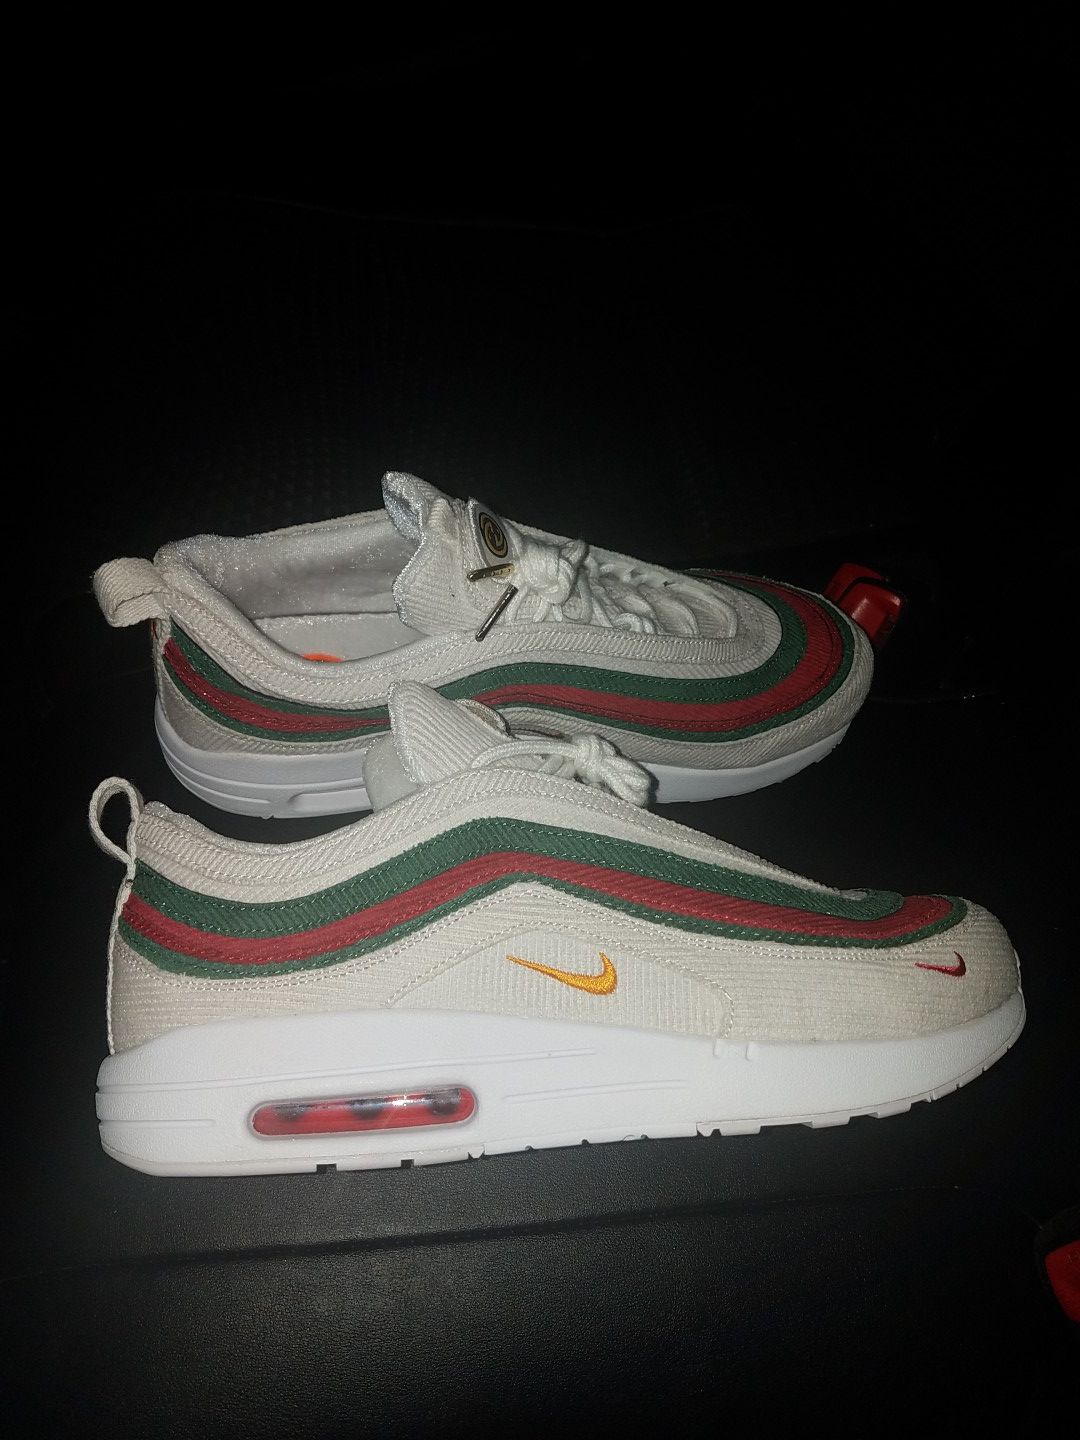 Jeugd Stationair diep Custom Gucci x Nike Air Max 1/97 Hybrid White/Red/Green for Sale in Bronx,  NY - OfferUp